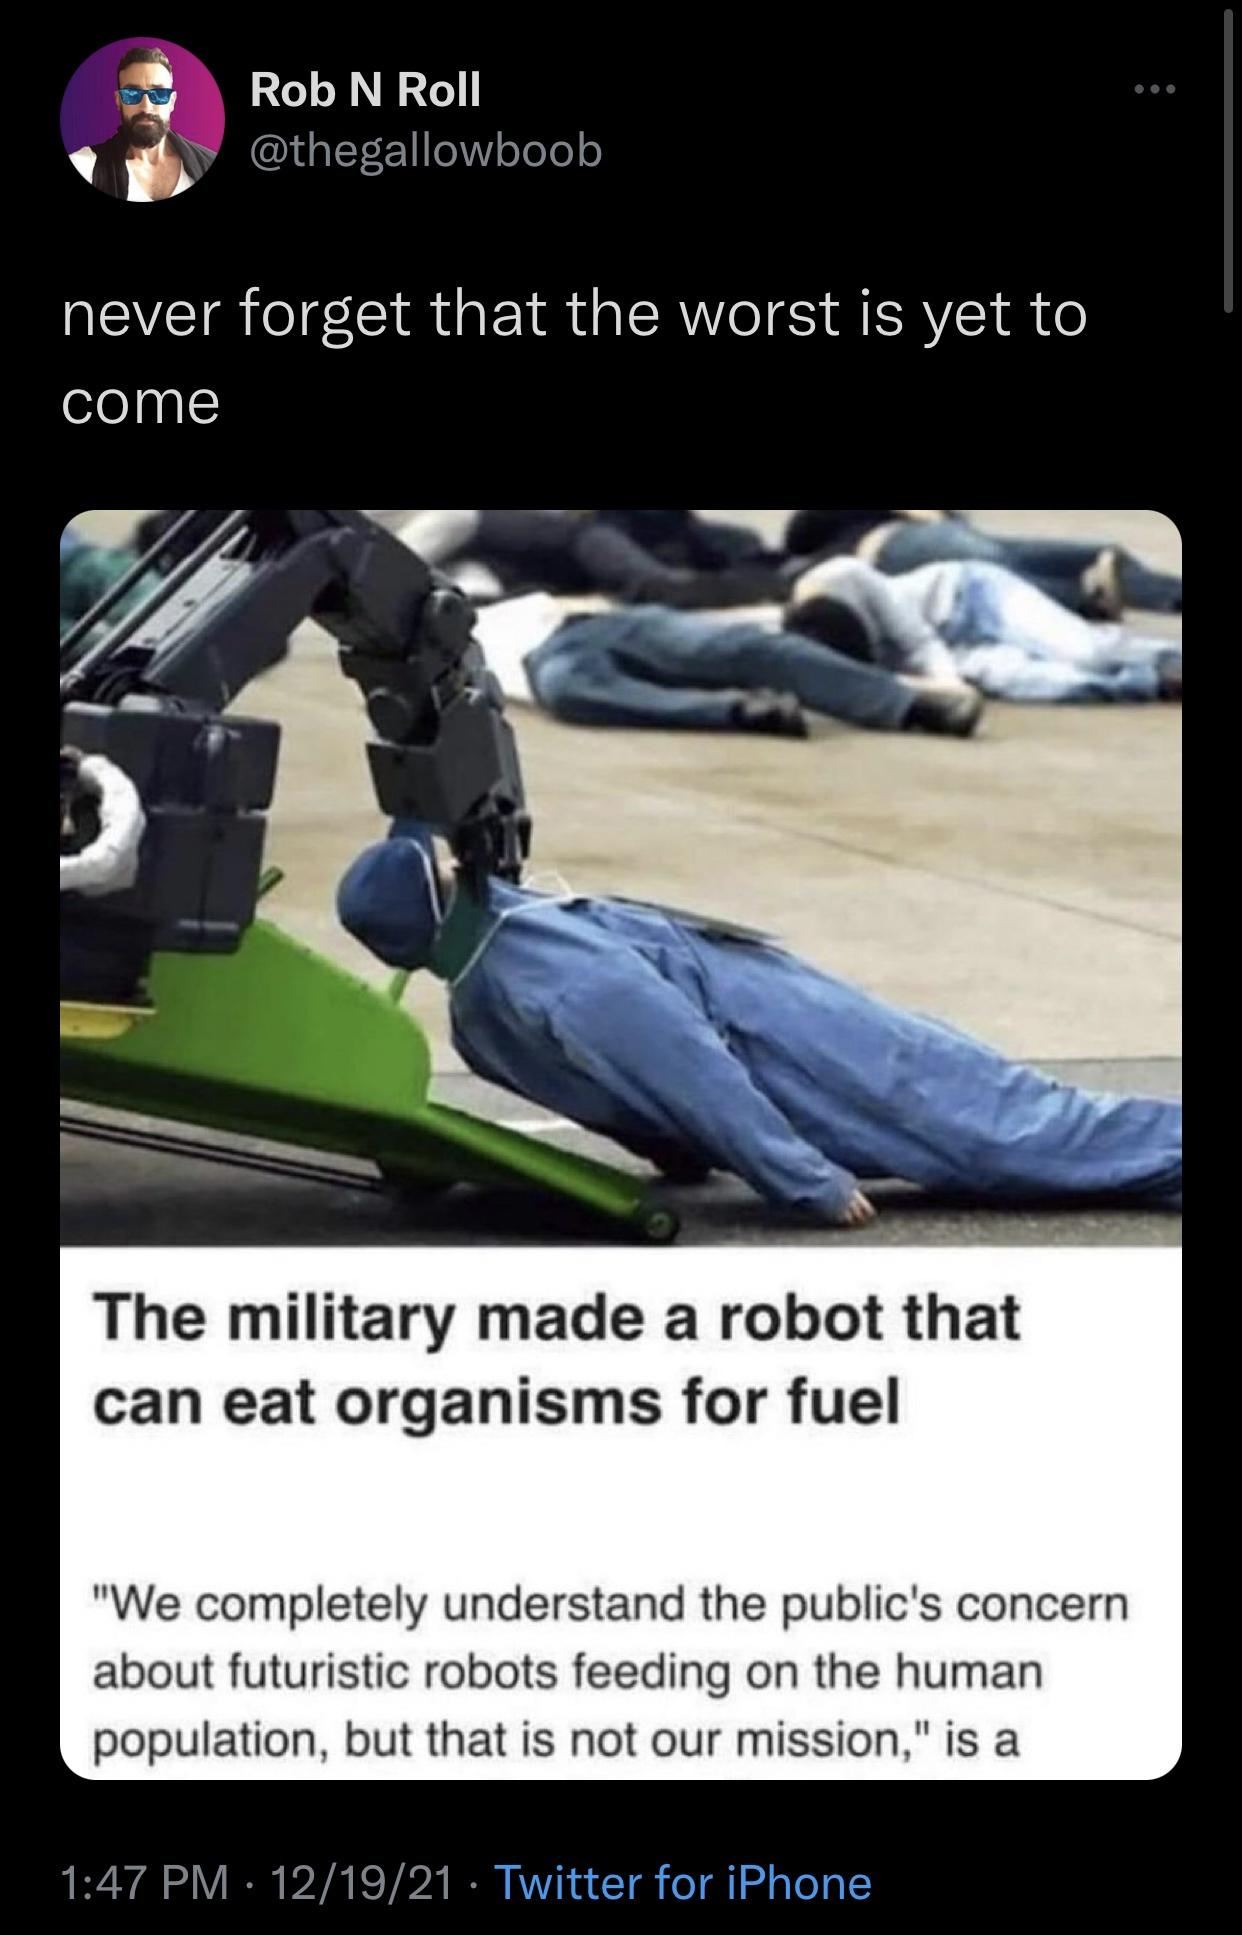 military made a robot that can eat organisms for fuel meme - Rob N Roll never forget that the worst is yet to come The military made a robot that can eat organisms for fuel "We completely understand the public's concern about futuristic robots feeding on 